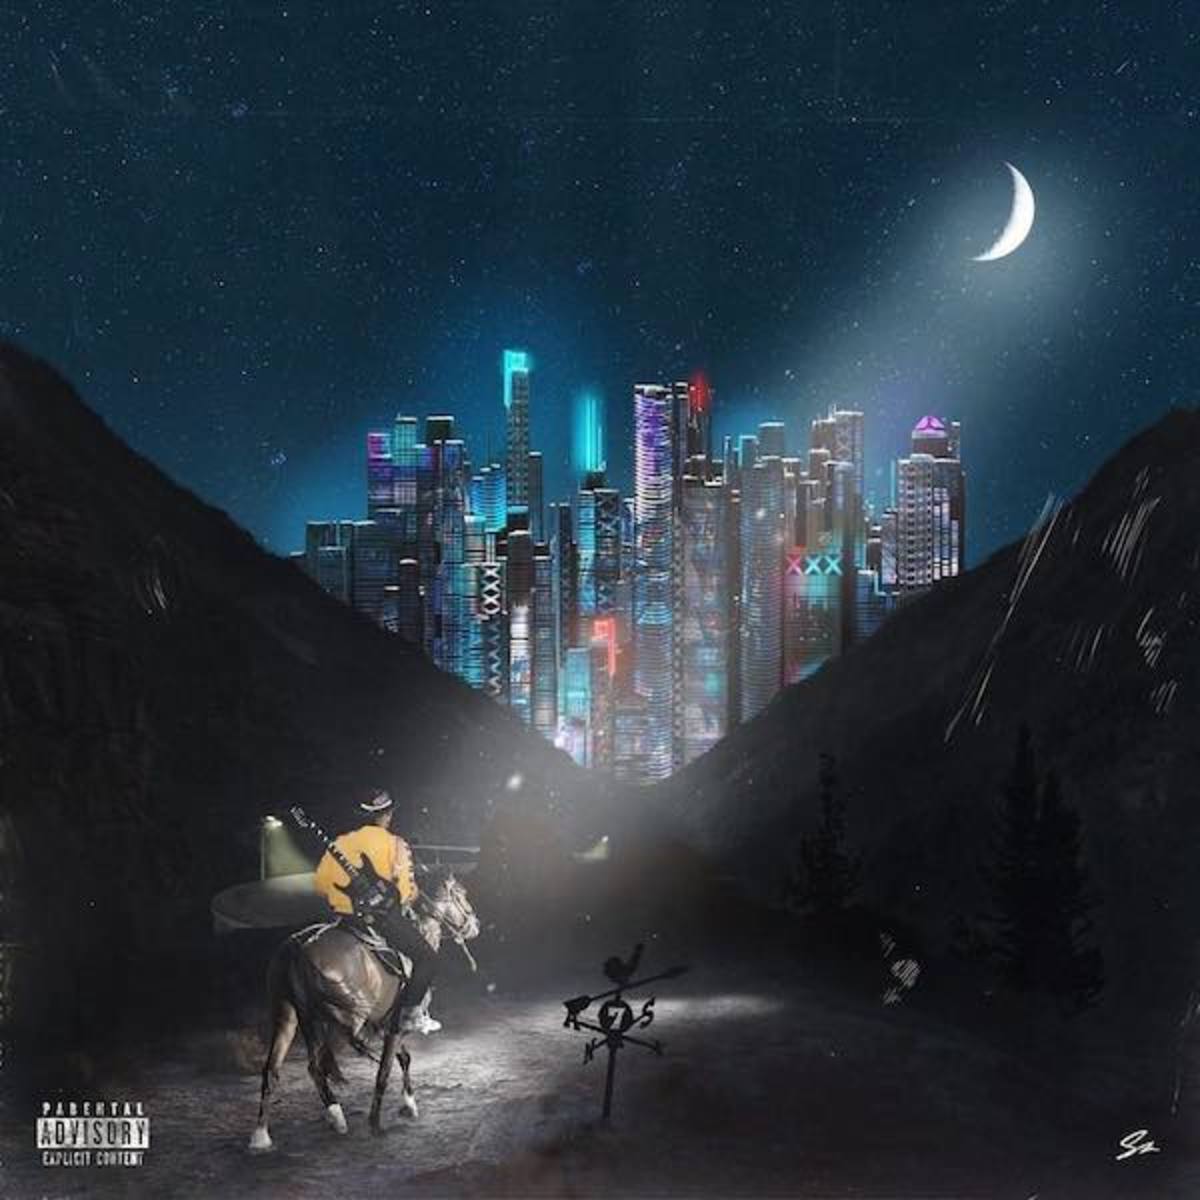 Lil Nas X follows up his smash hit “Old Town Road” with his major label deb...